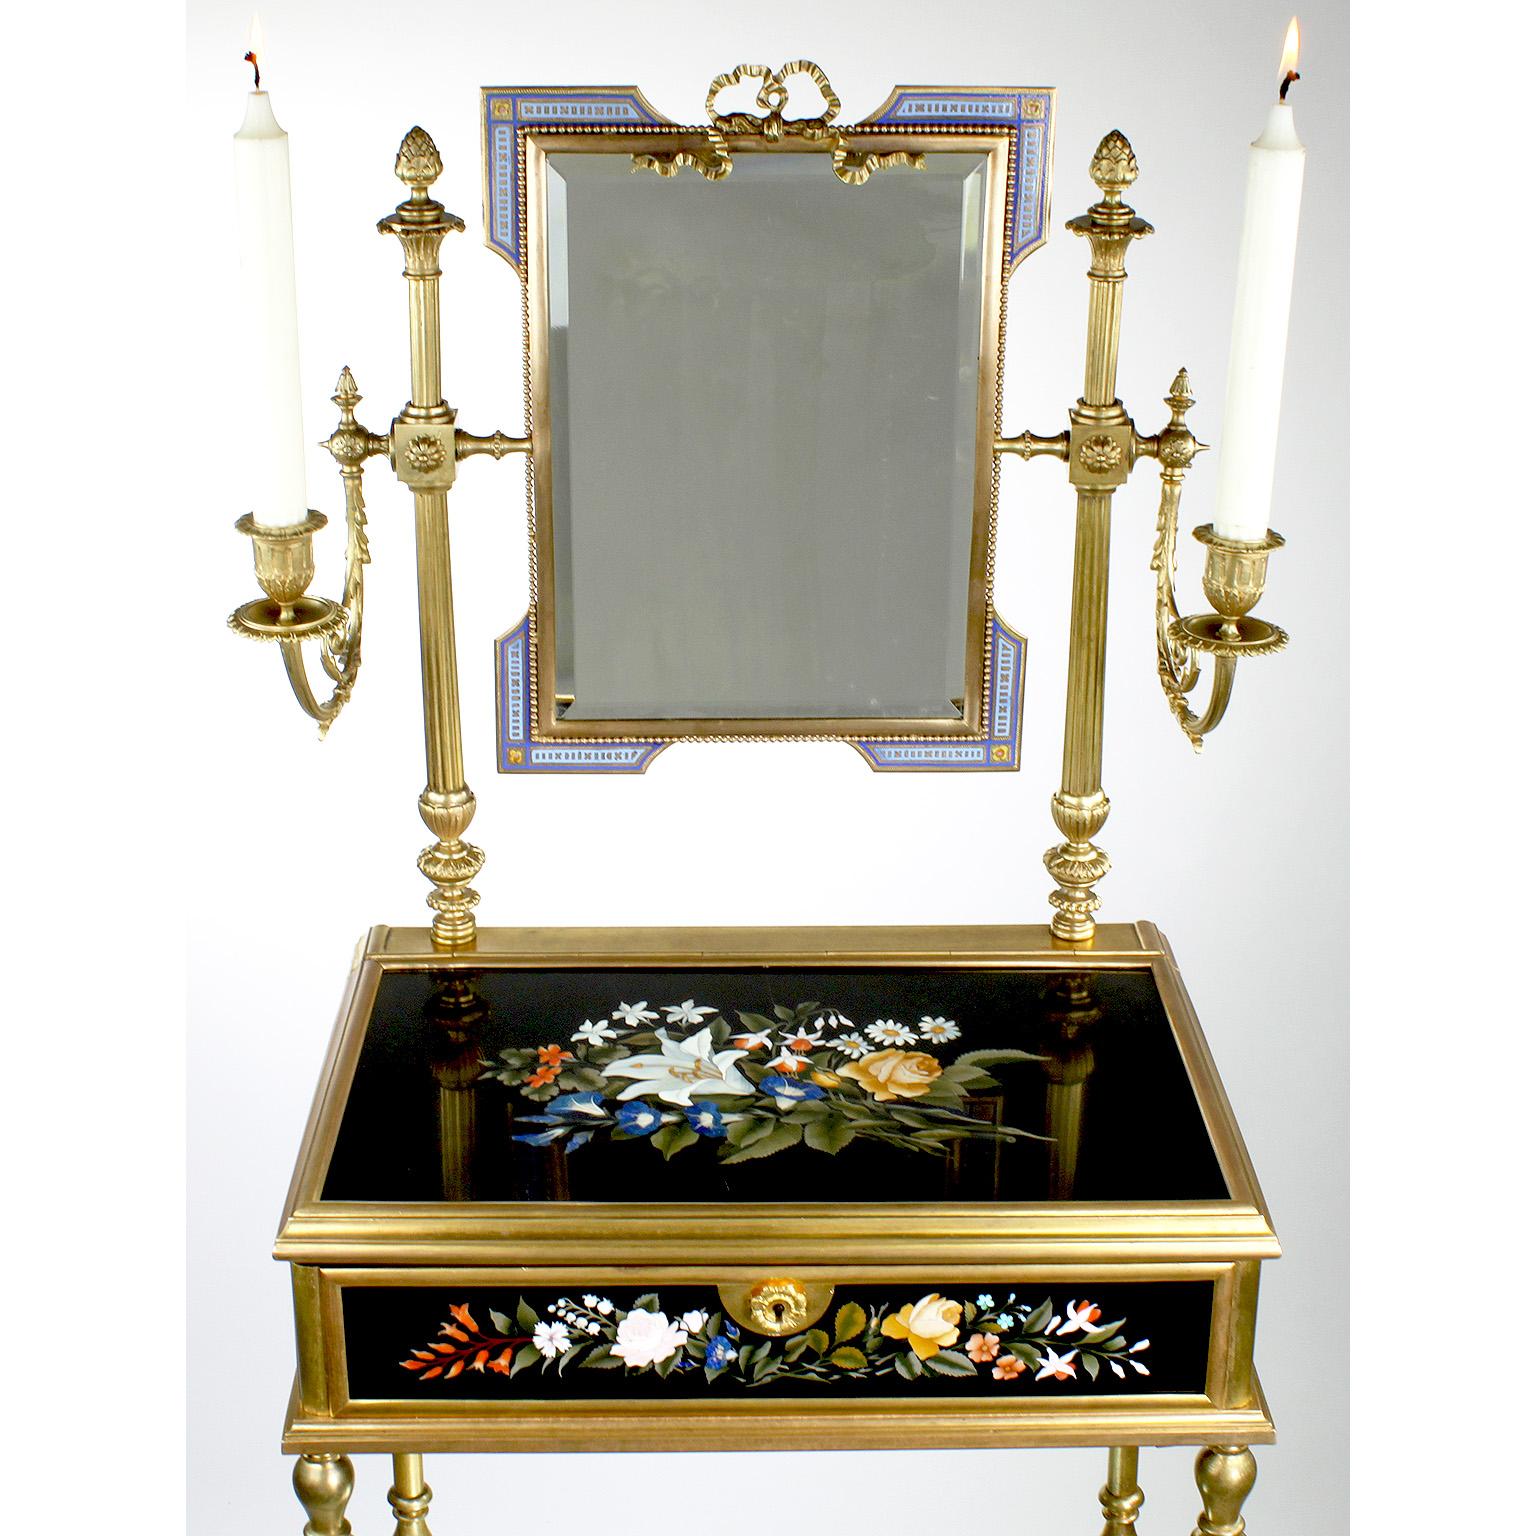 Rococo Revival French 19th Century Gilt-Bronze and Pietra Dura Vanity Stand, Attr. Tahan, Paris For Sale